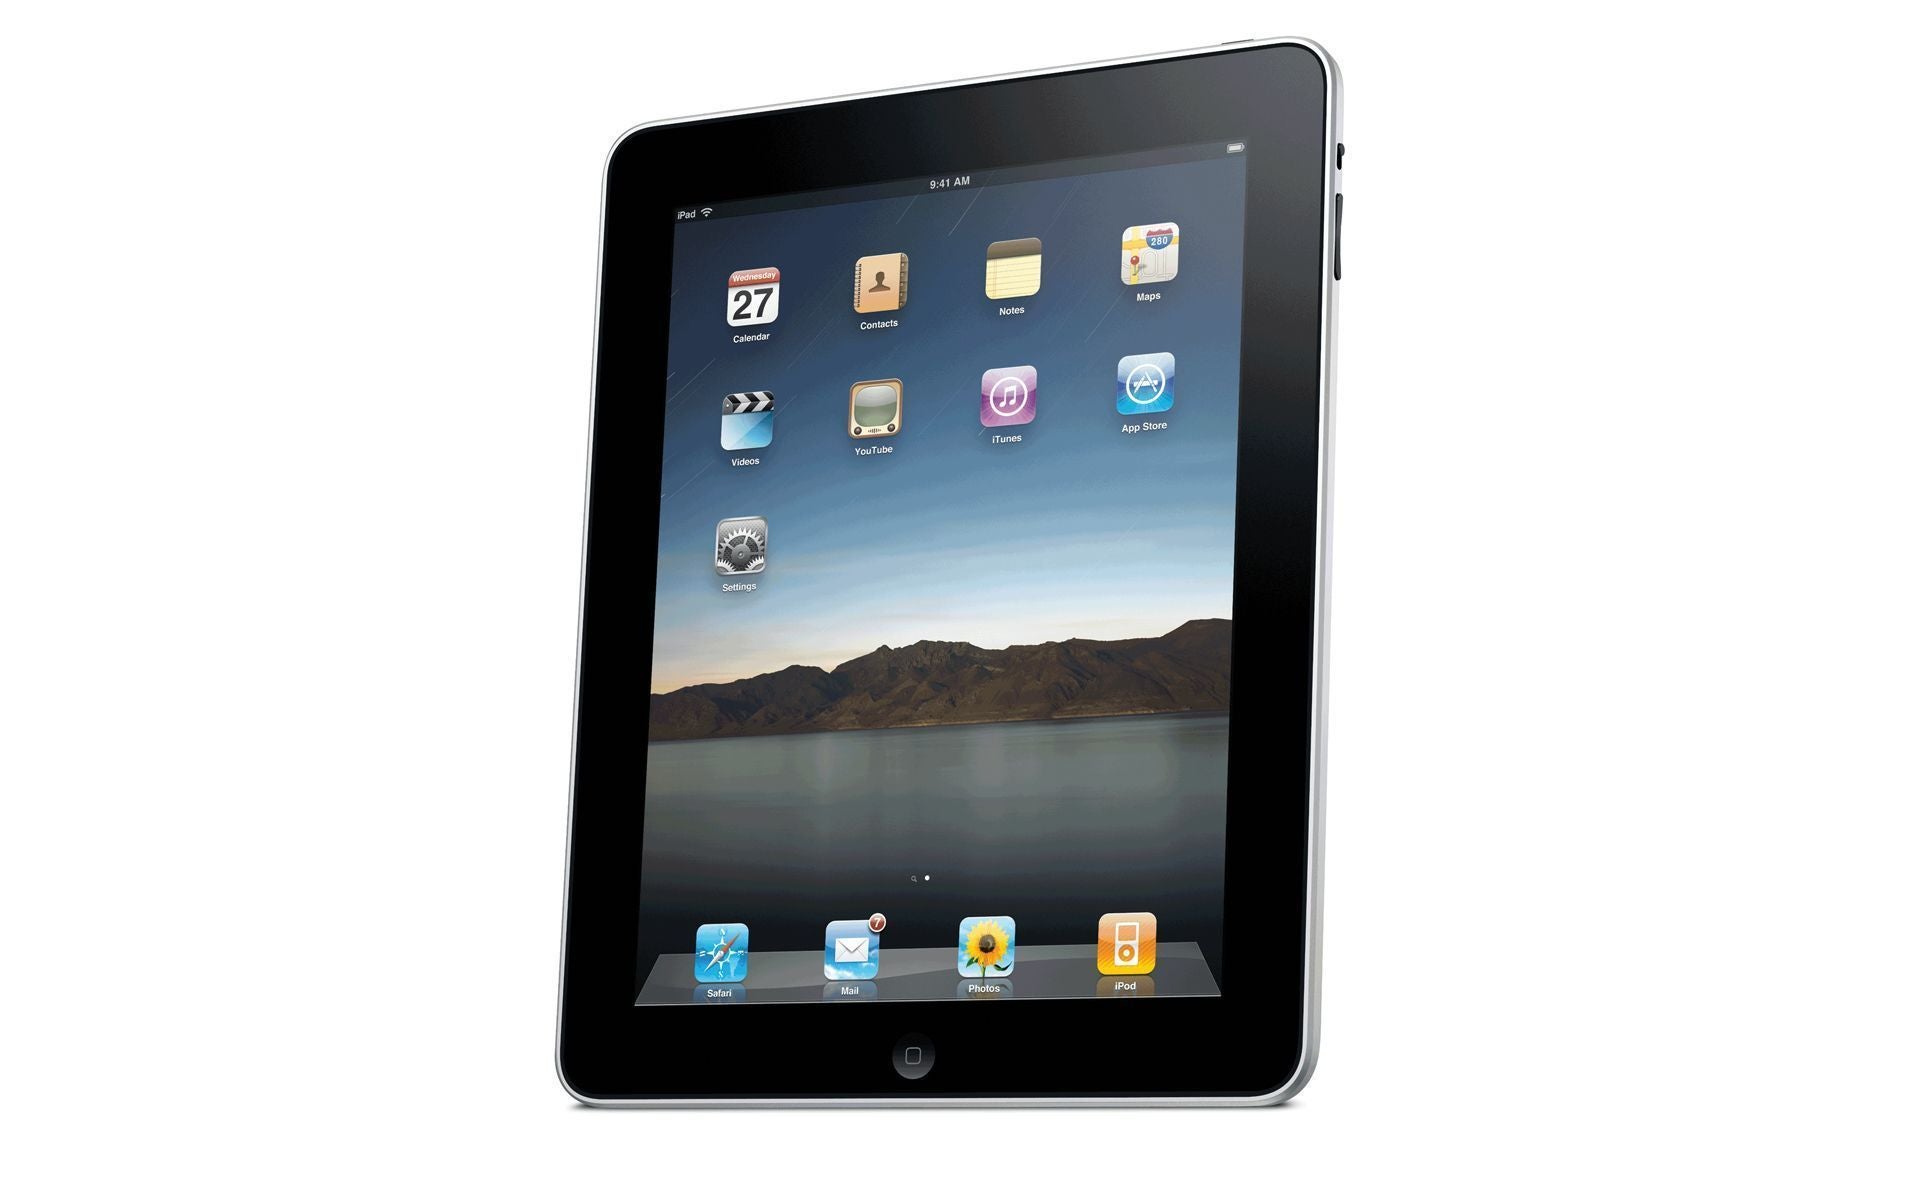 The Apple iPad 2 - Analyst: Next Apple iPad coming in February with a higher resolution screen